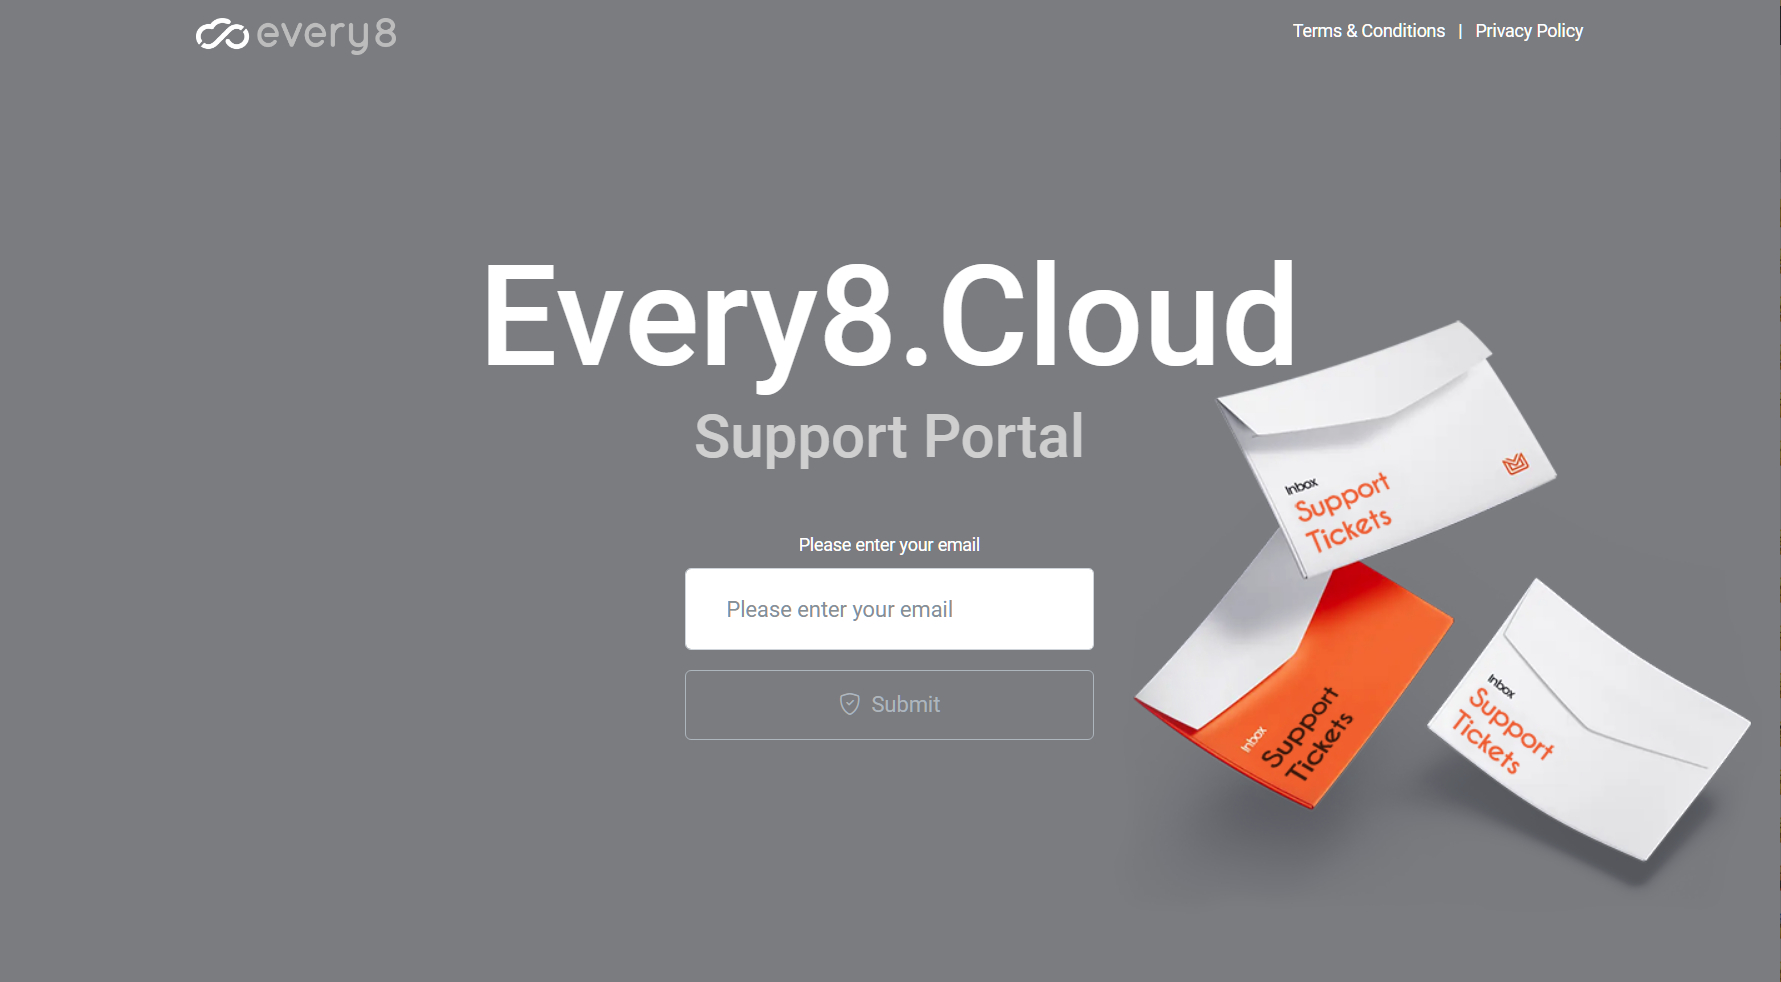 New Every8.Cloud Support Portal